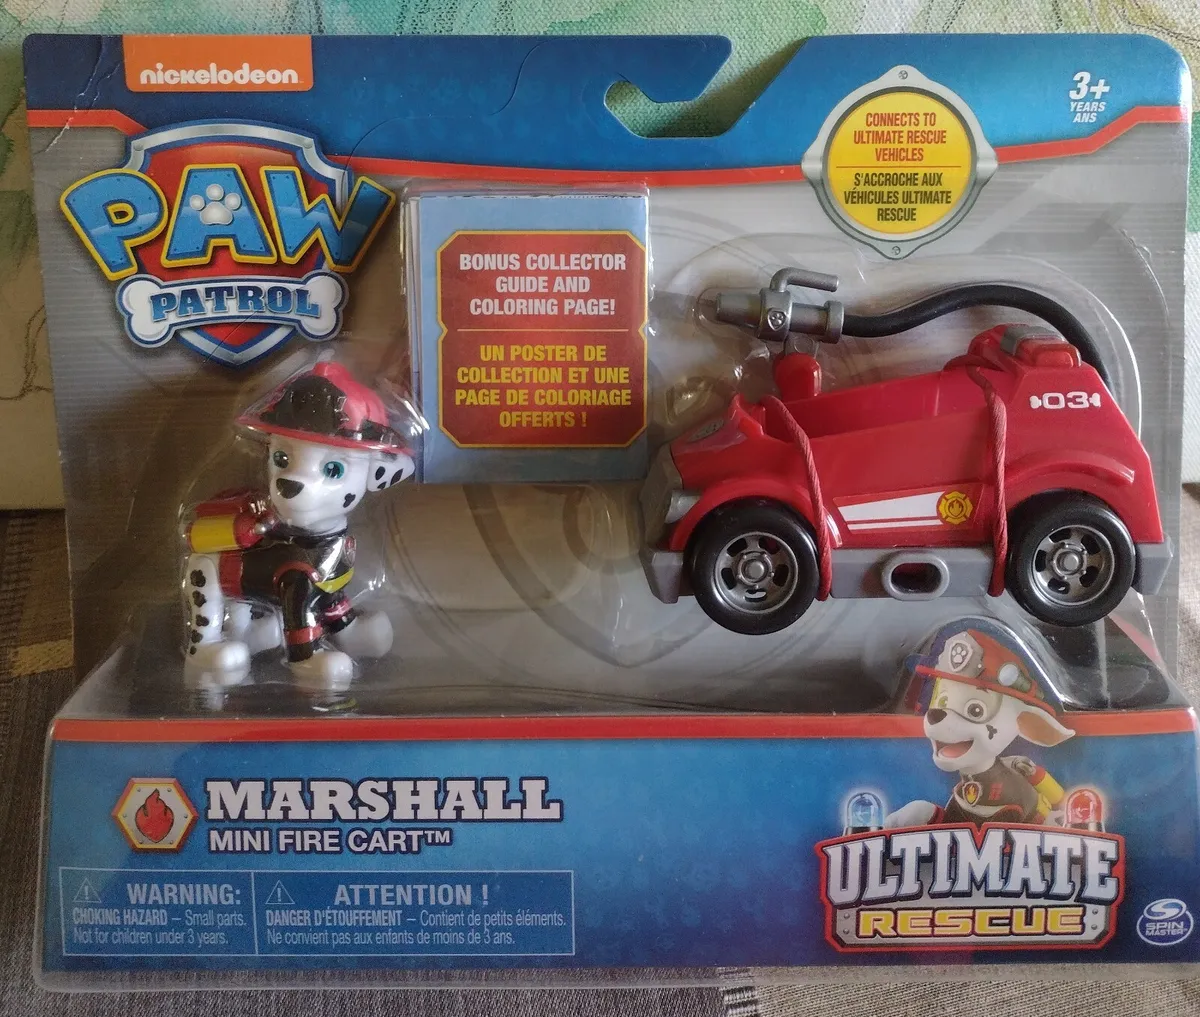 Paw patrol marshall mini fire cart ultimate rescue set by spin master